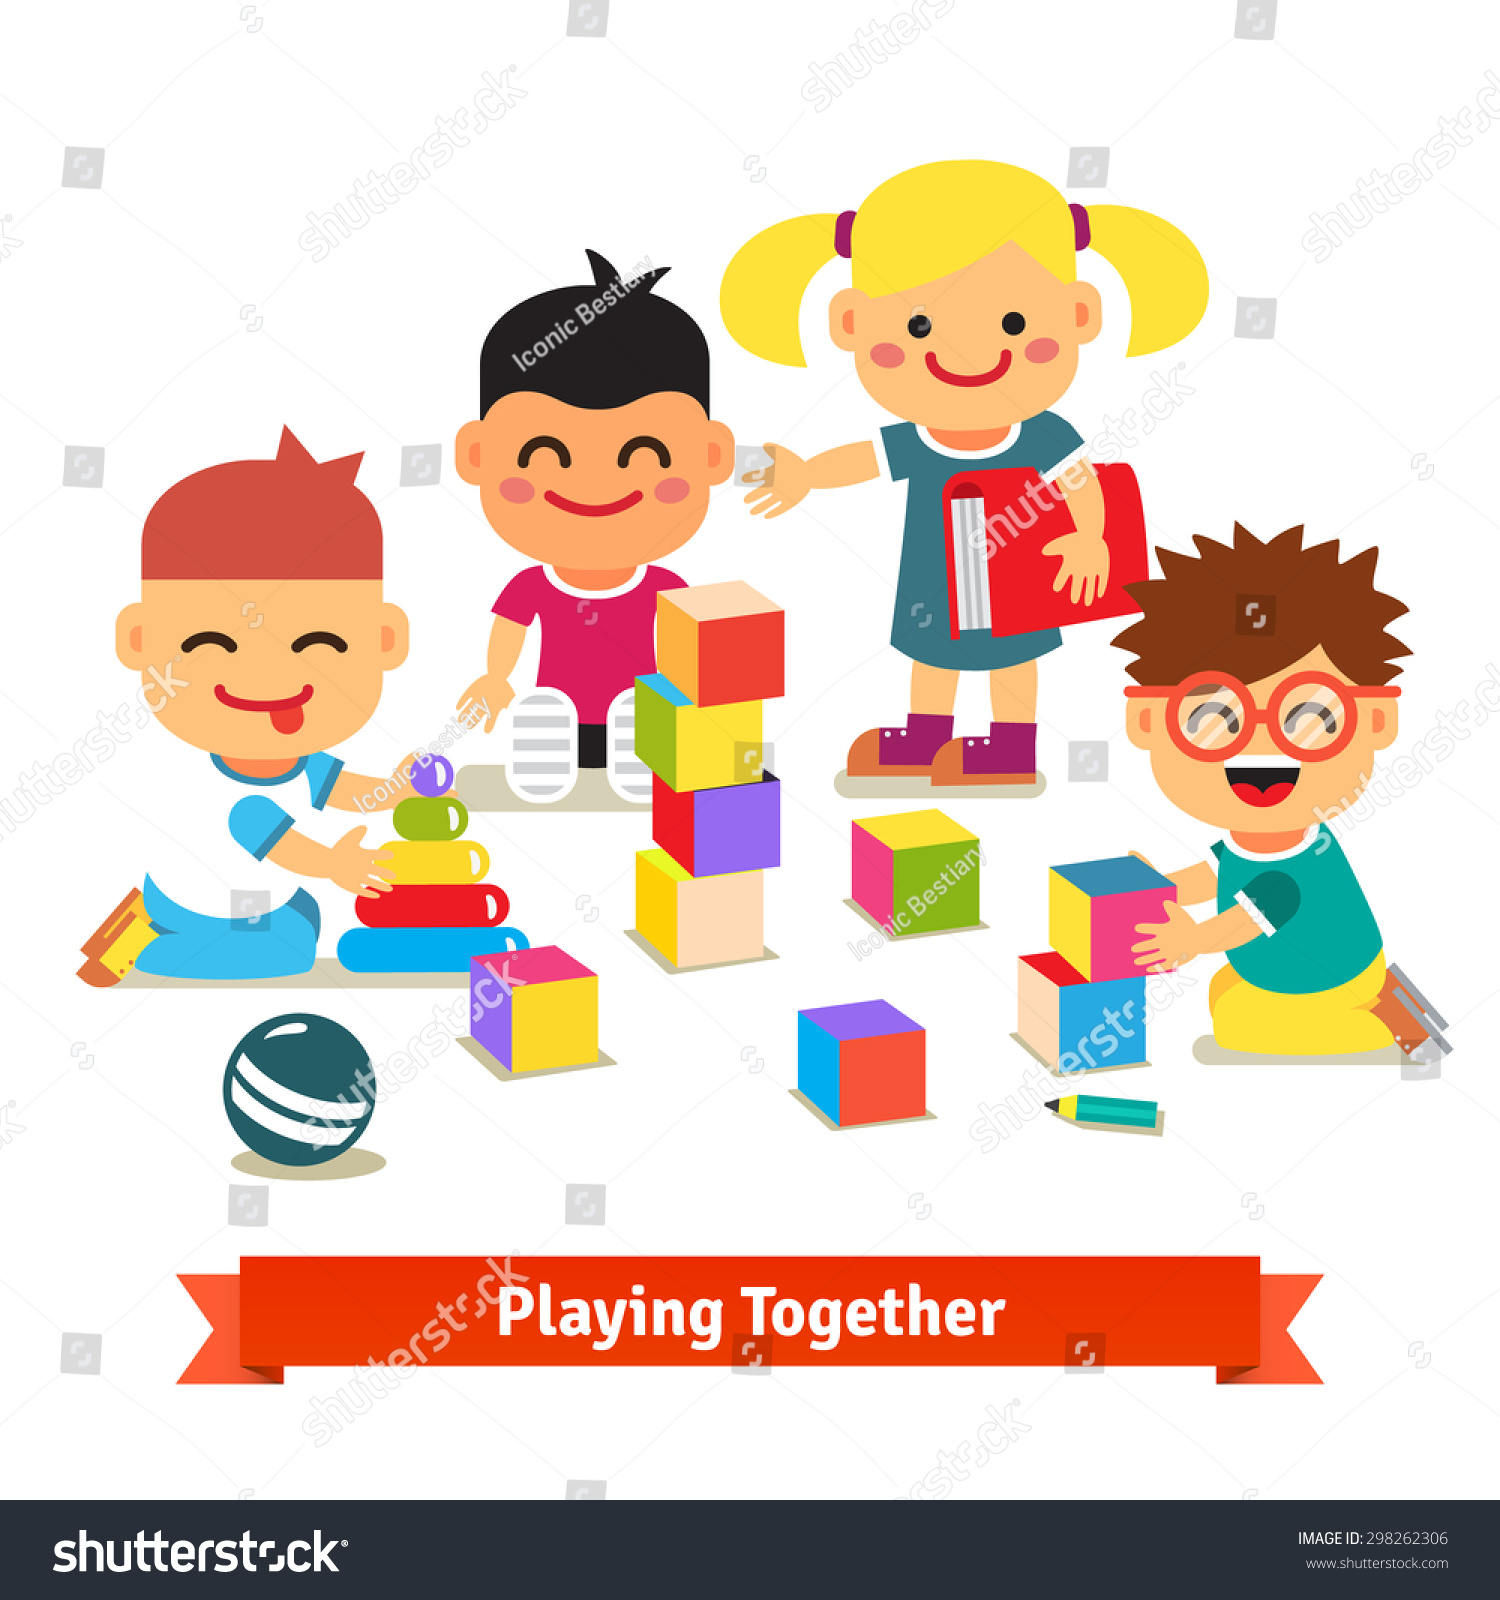 play together clipart - photo #13